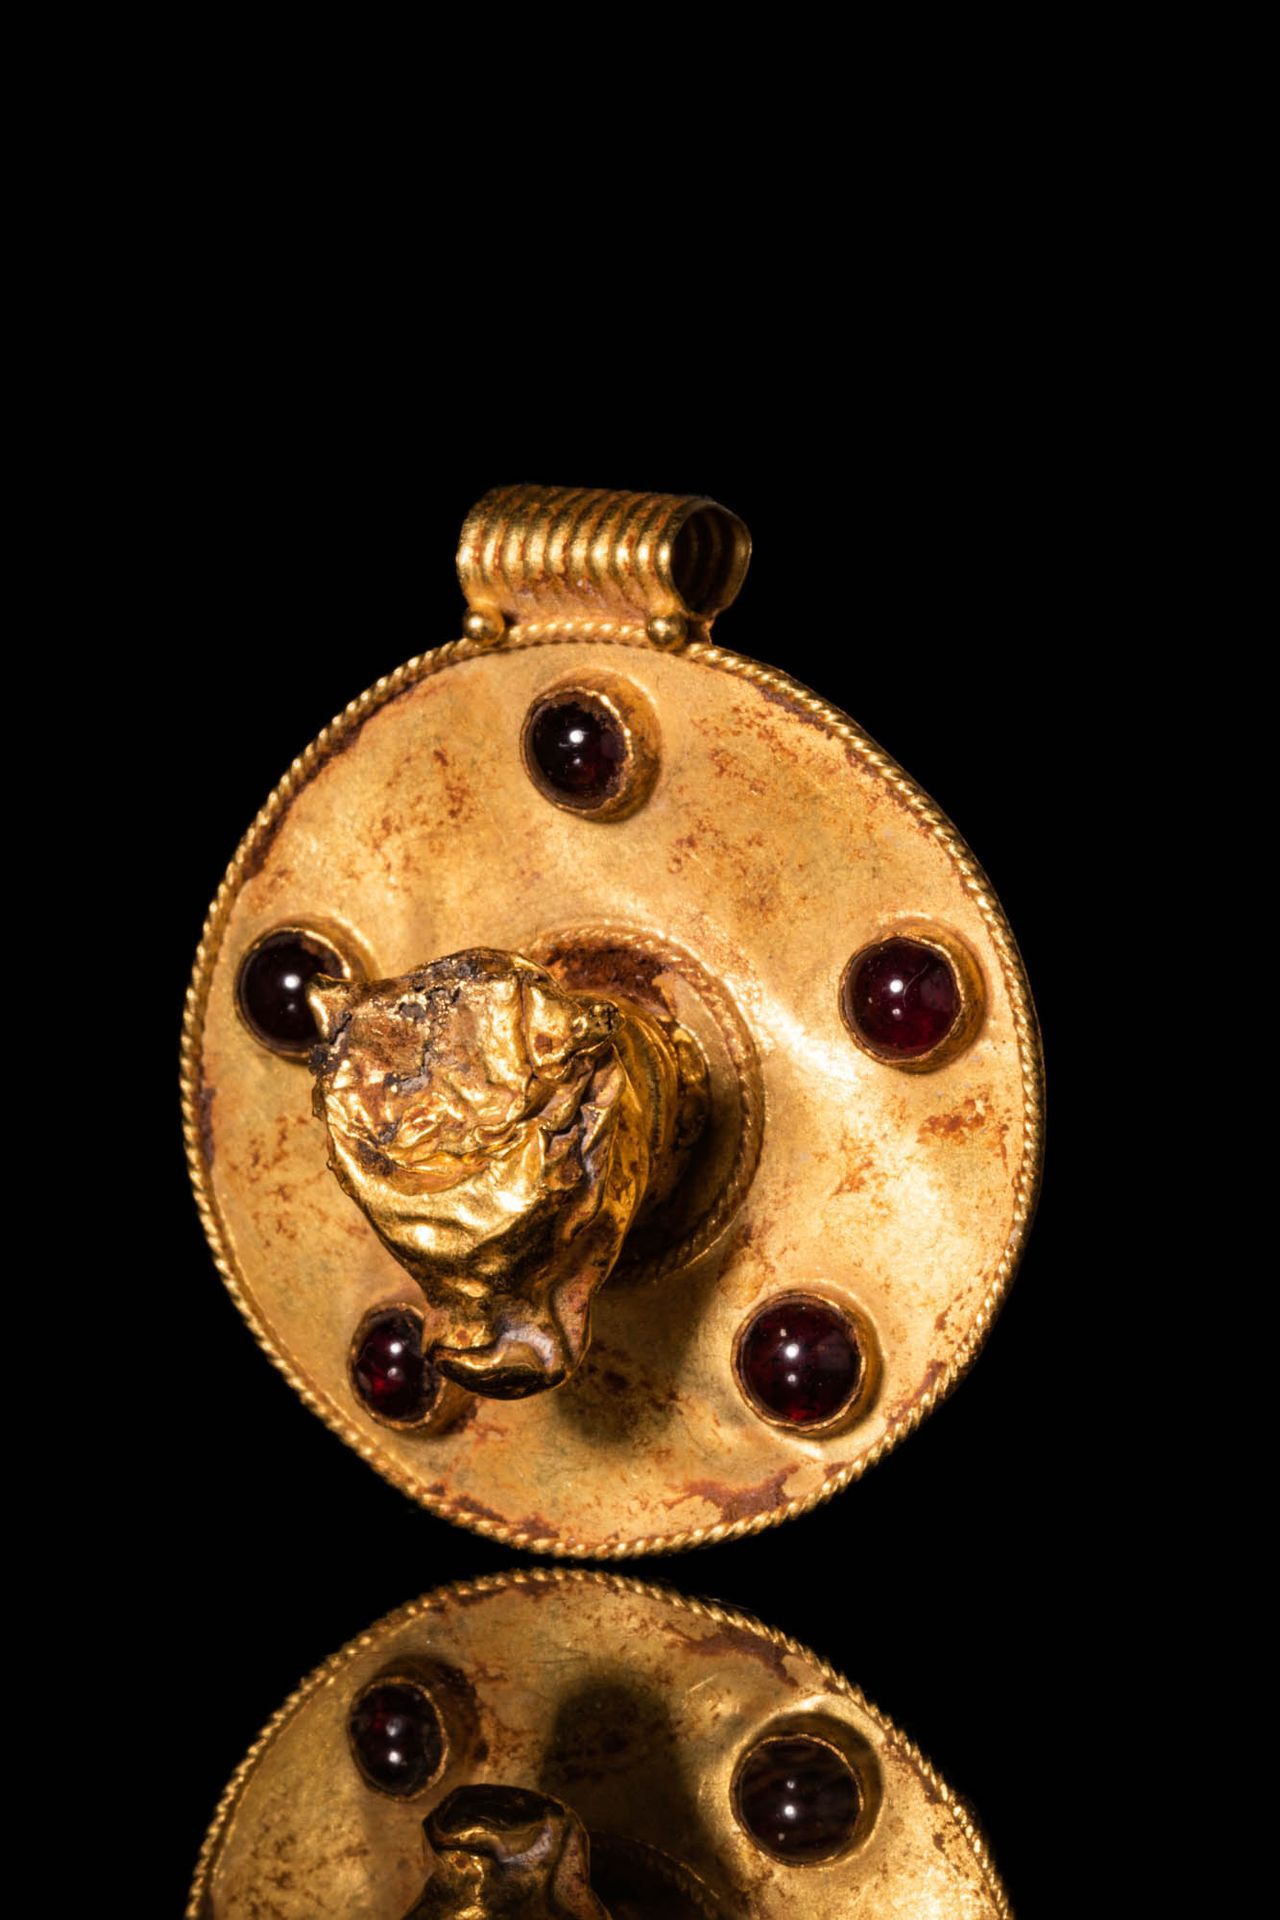 HELLENISTIC GOLD PENDANT WITH CENTRAL BULL PROTOME 约公元前 400 年。约公元前 400 年。
希腊化时期的&hellip;